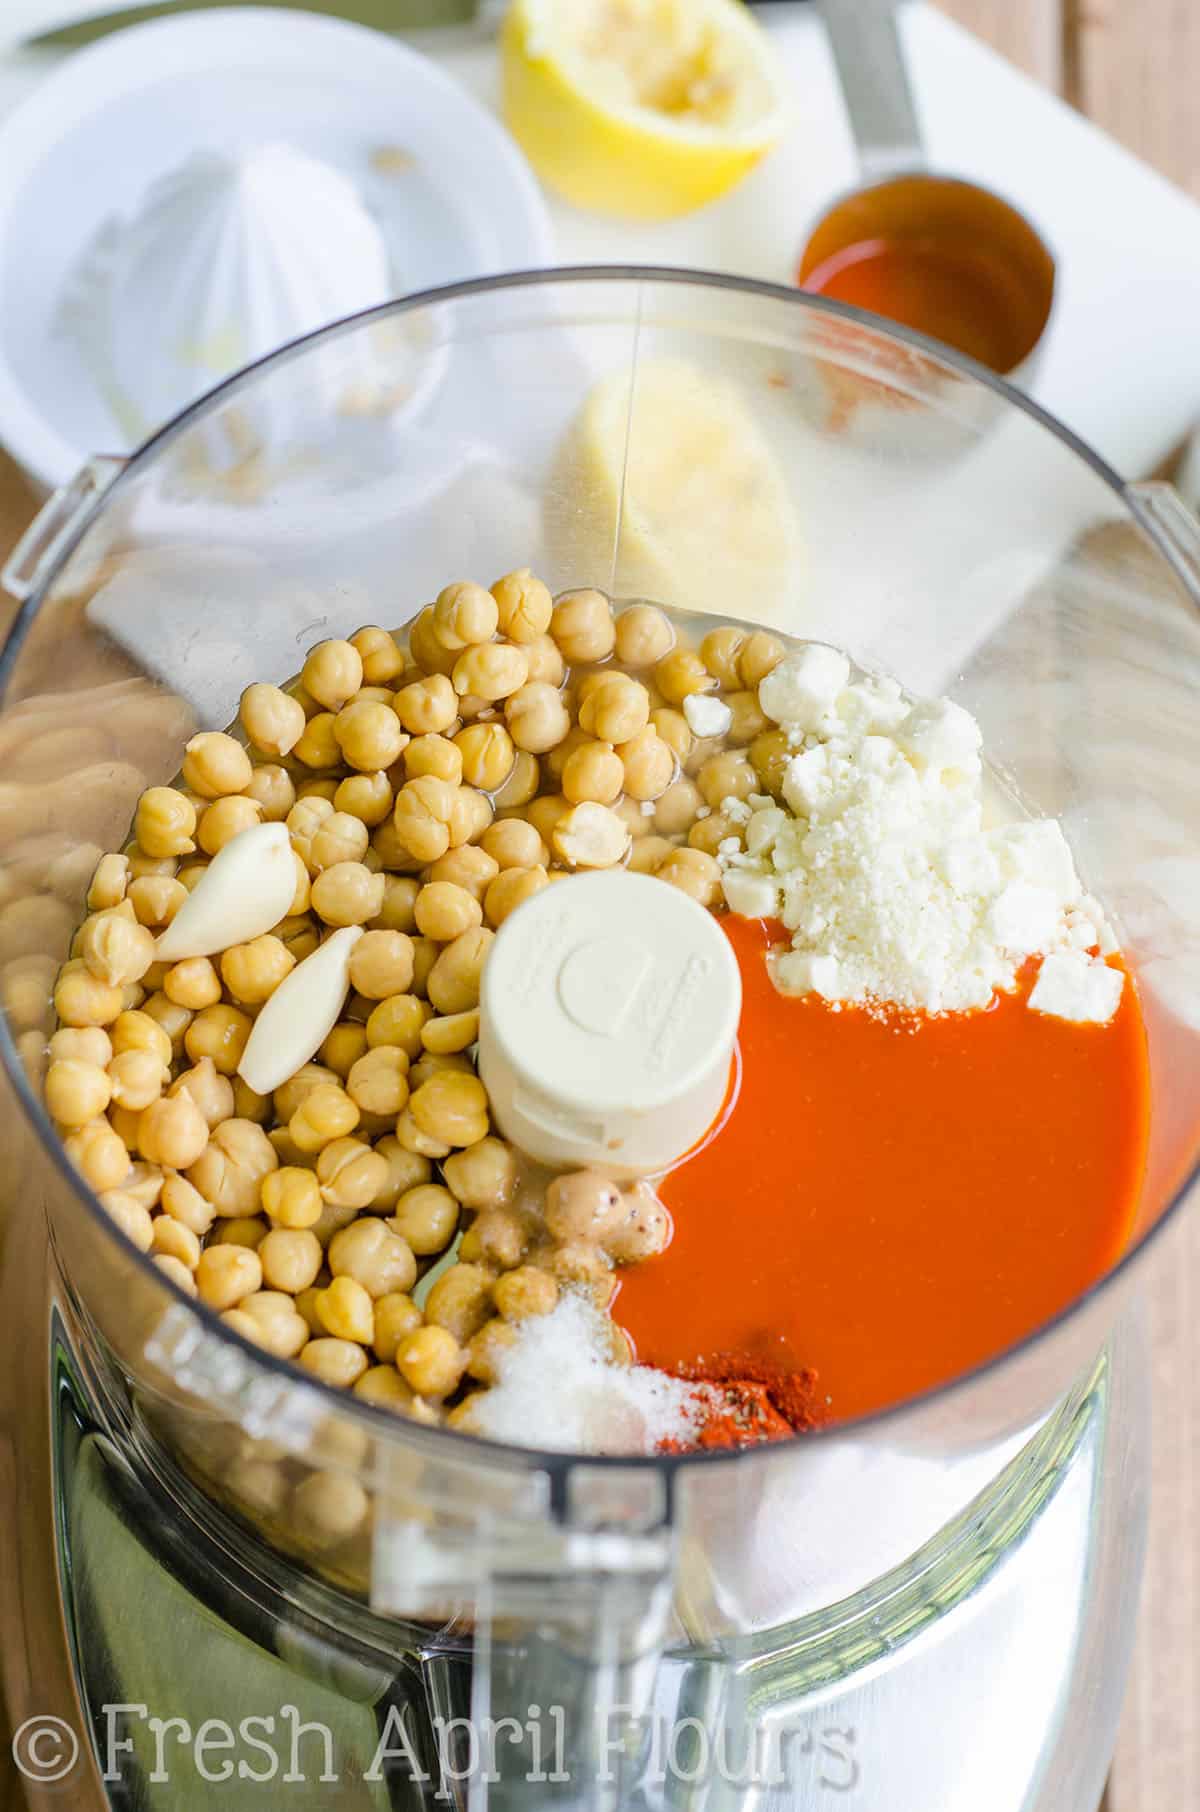 Ingredients for buffalo hummus in a food processor ready to blend.